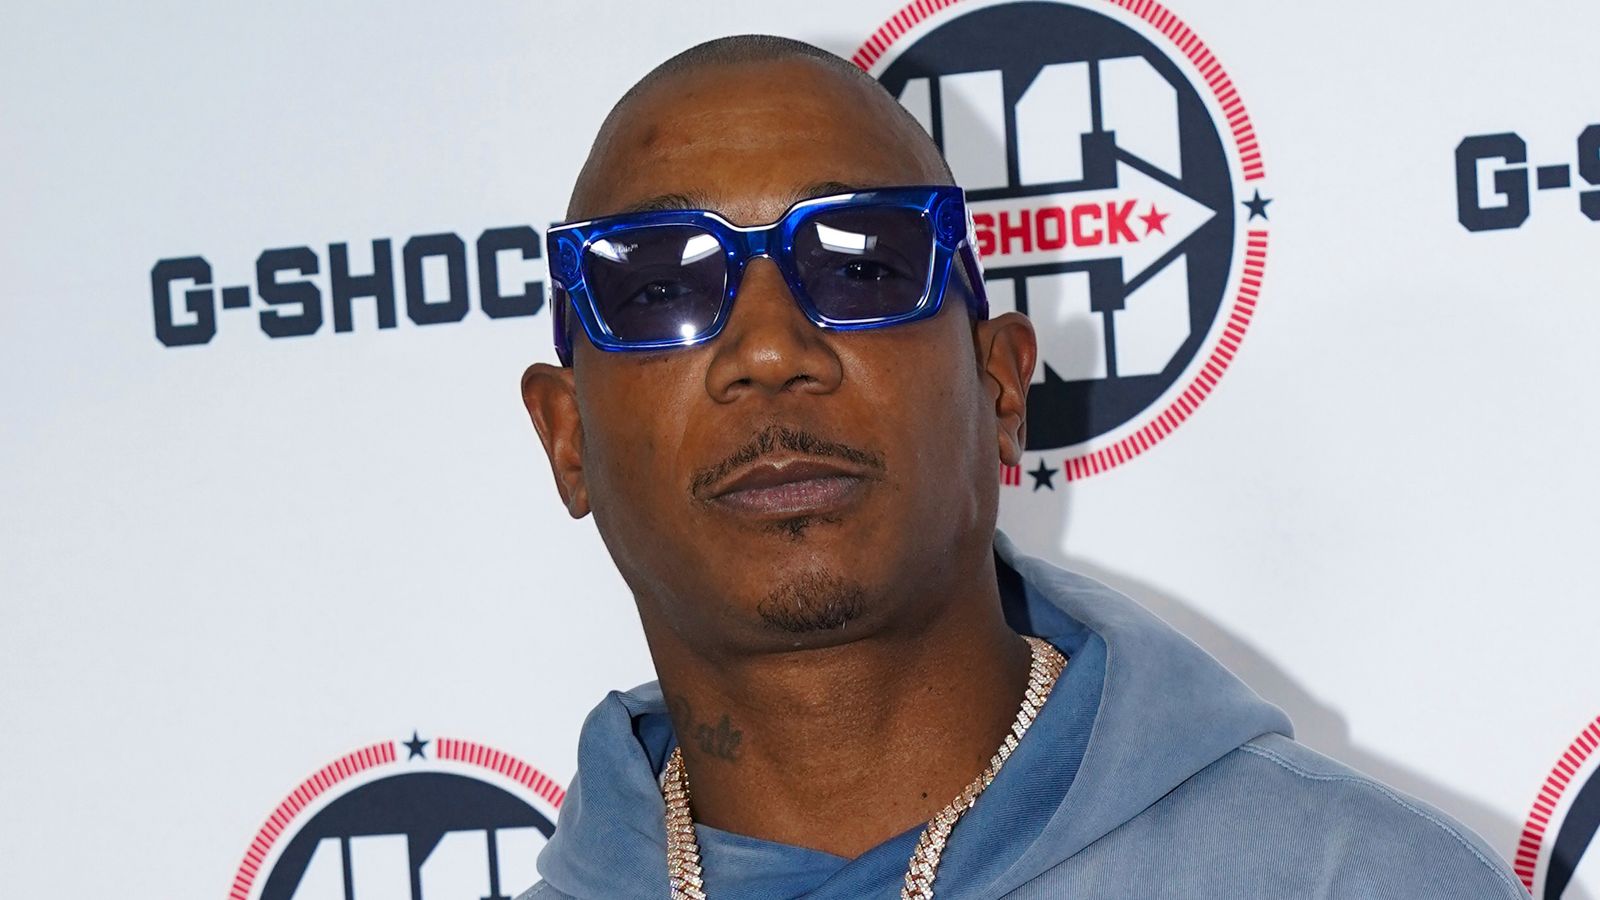 Ja Rule denied entry to the UK - days before tour starts